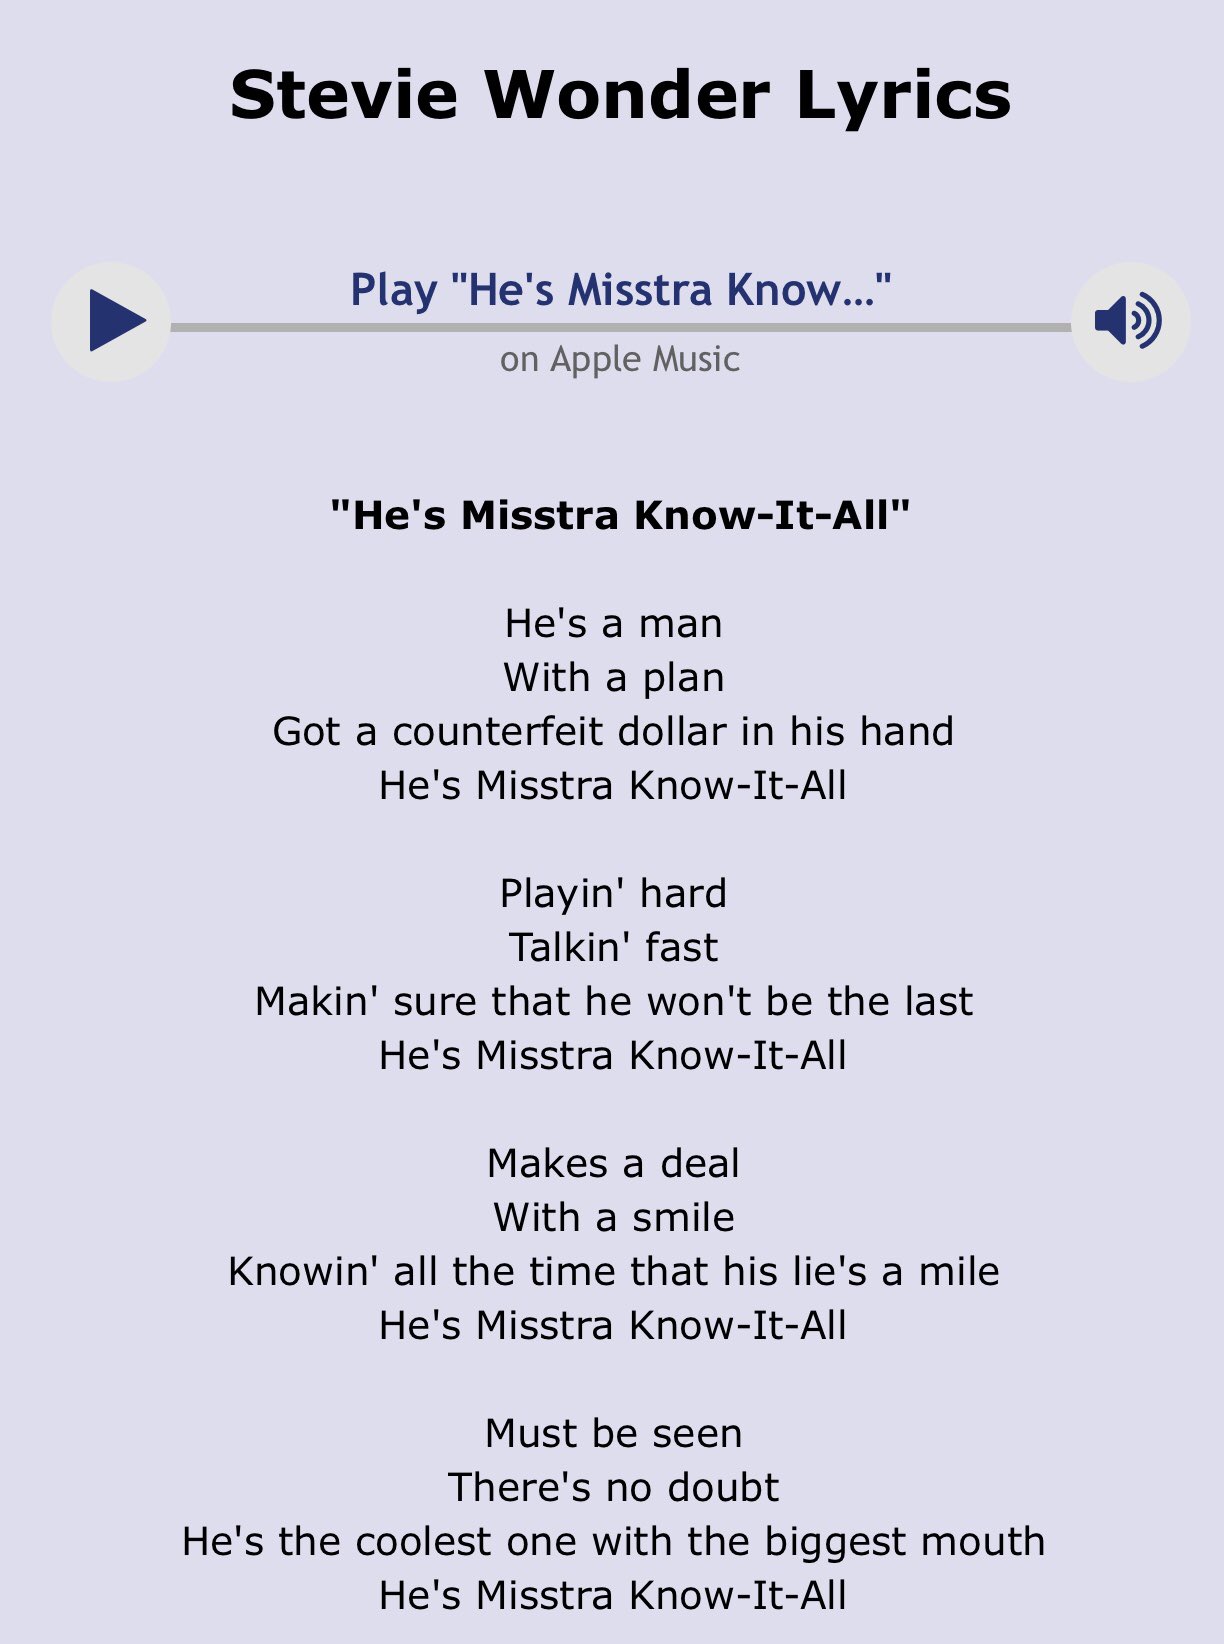 hes misstra know it all meaning